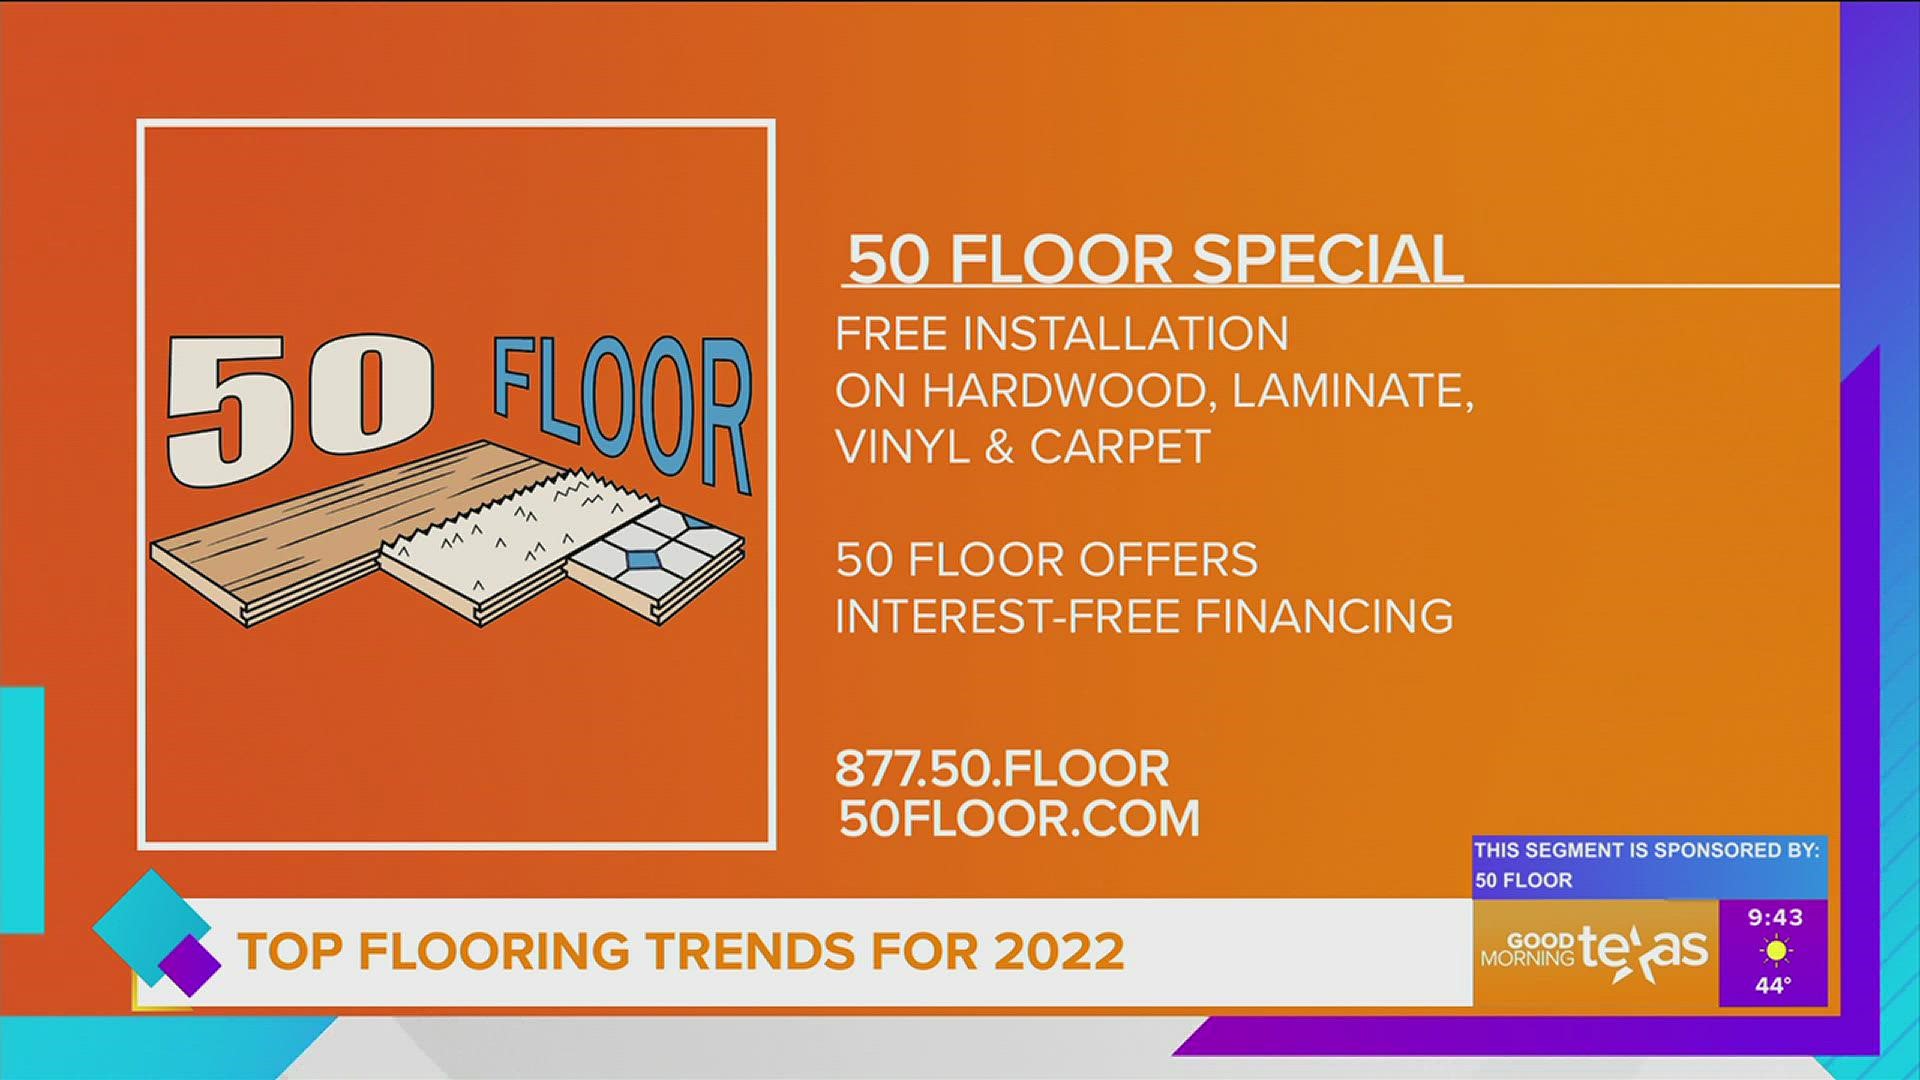 This segment is sponsored by 50 Floor.